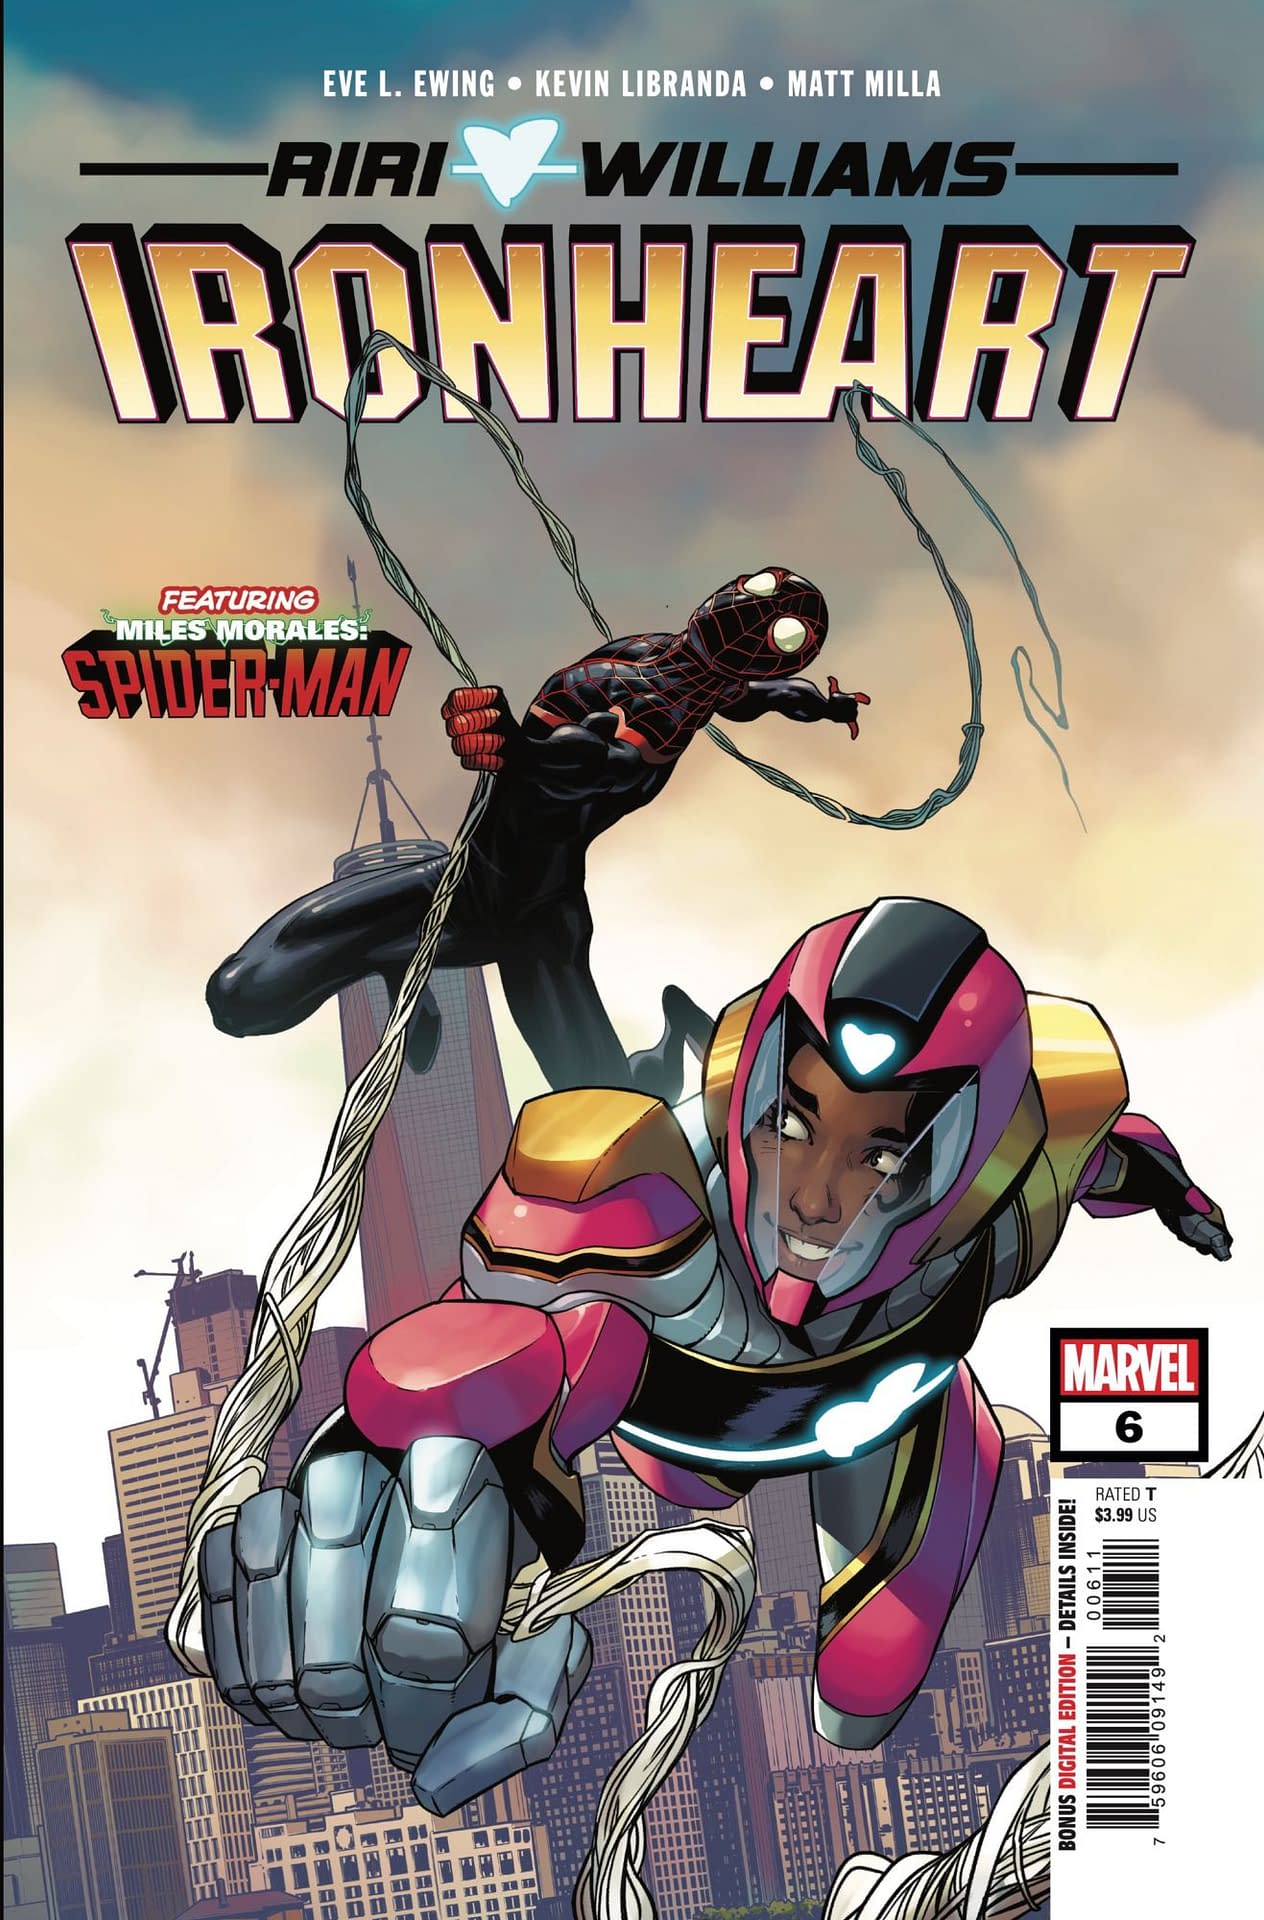 Maybe Spider-People and Iron-People Shouldn't Be Friends? Ironheart #6 Preview